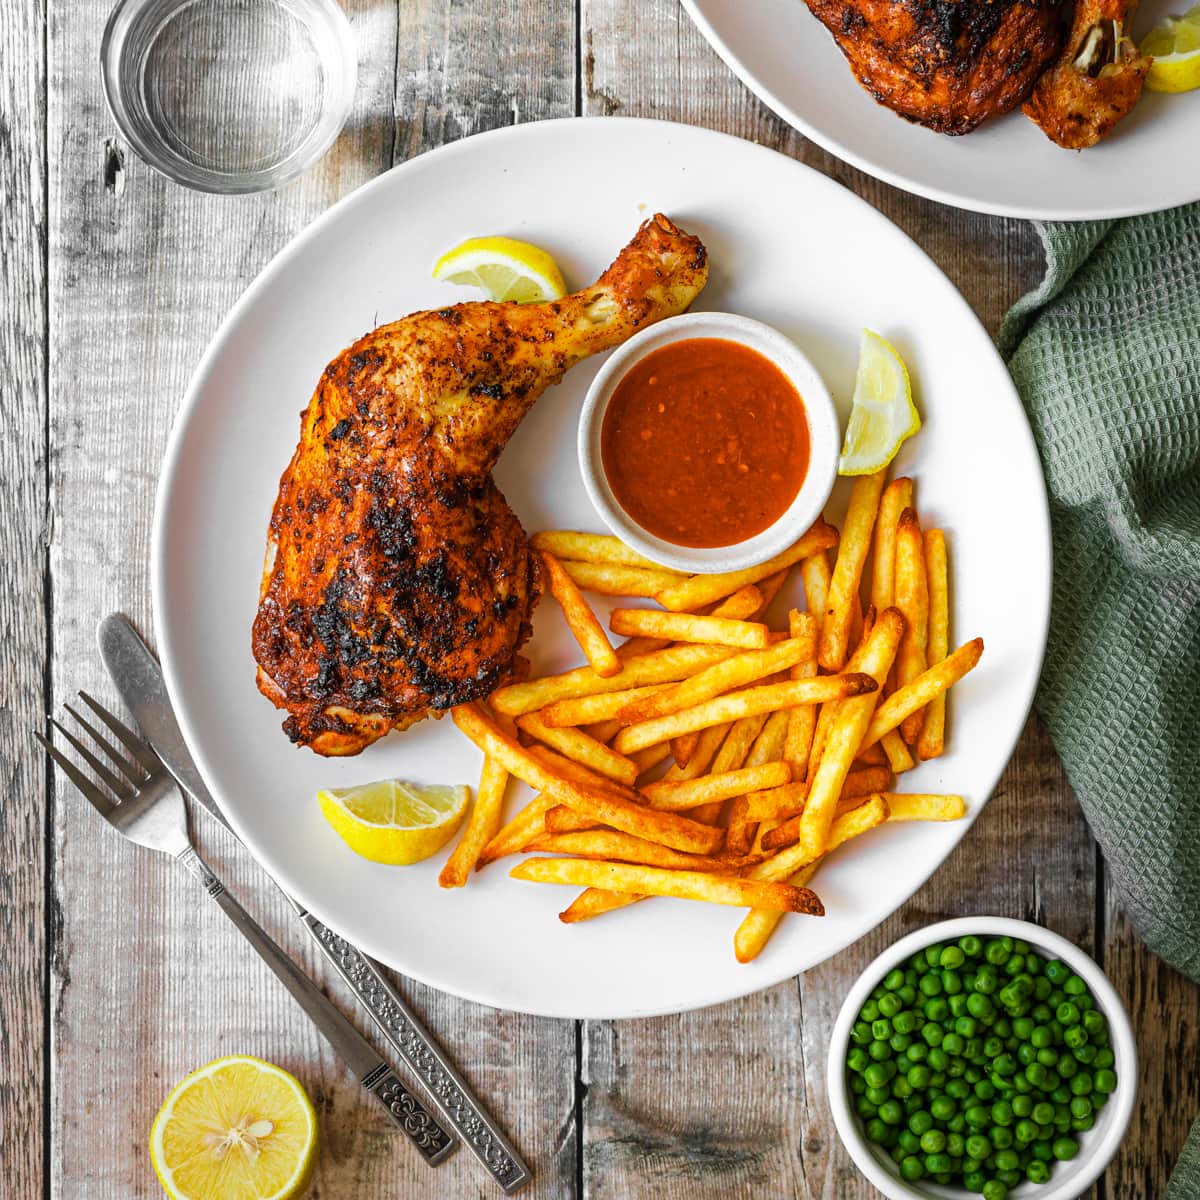 Homemade Nandos chicken legs with fries